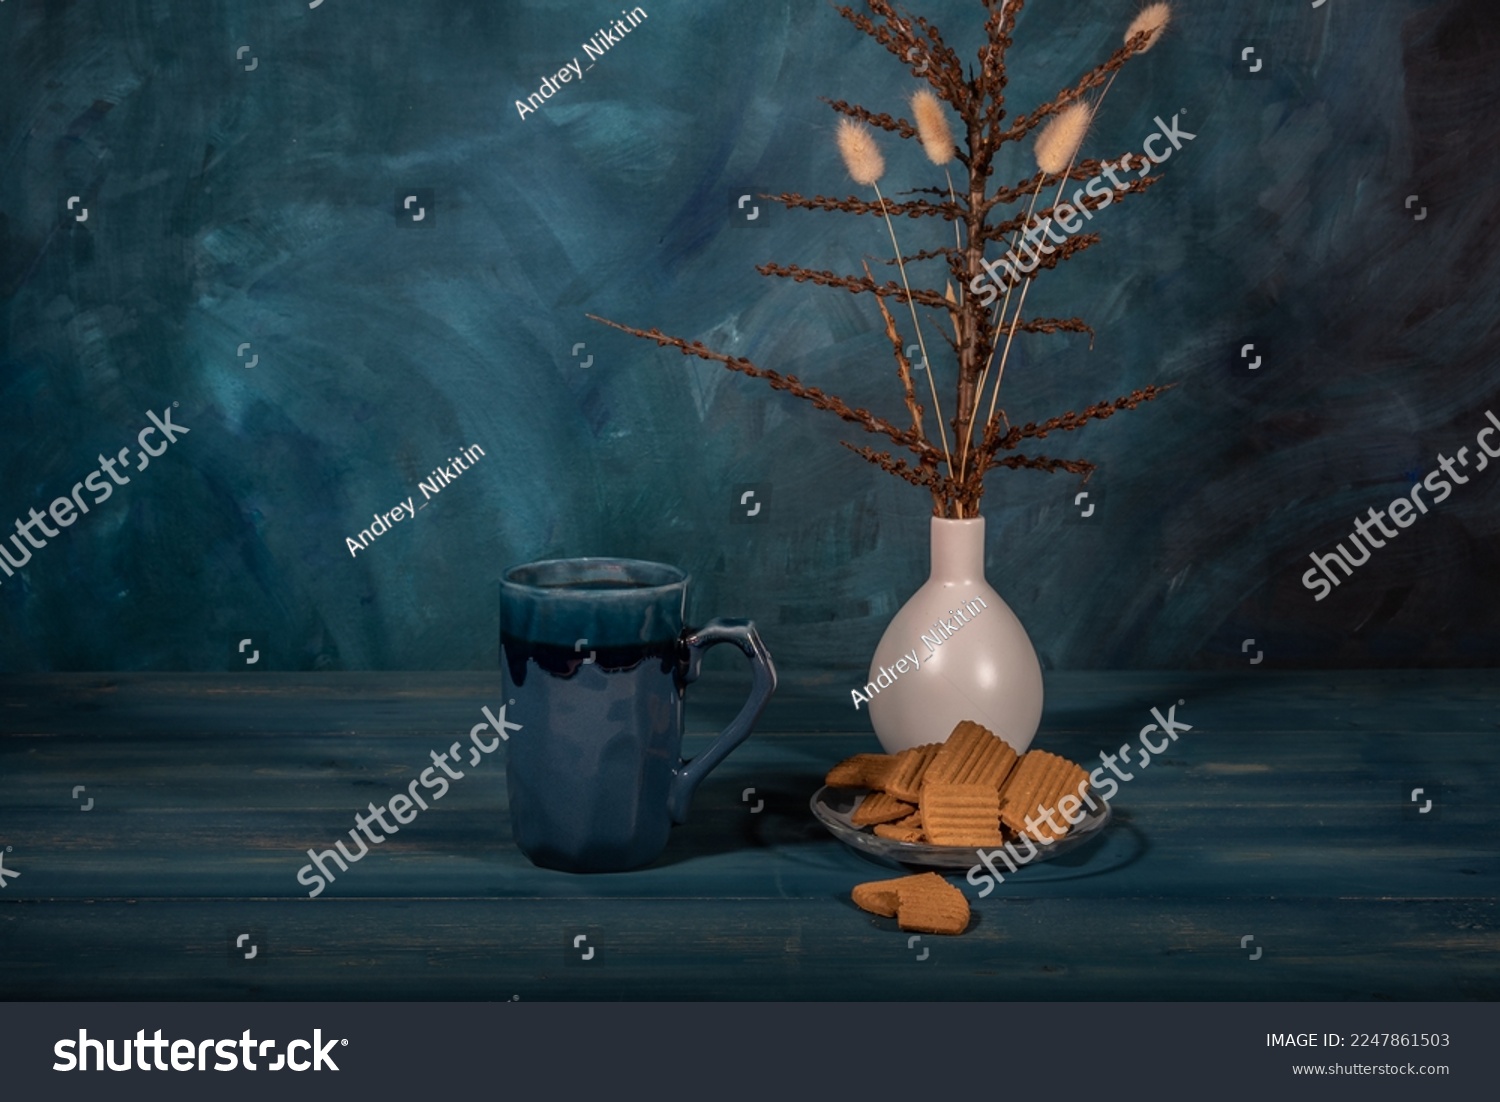 Gingerbread cookies on a saucer, a cup of tea and a bouquet of dry branches in a vase on a dark blue background. #2247861503